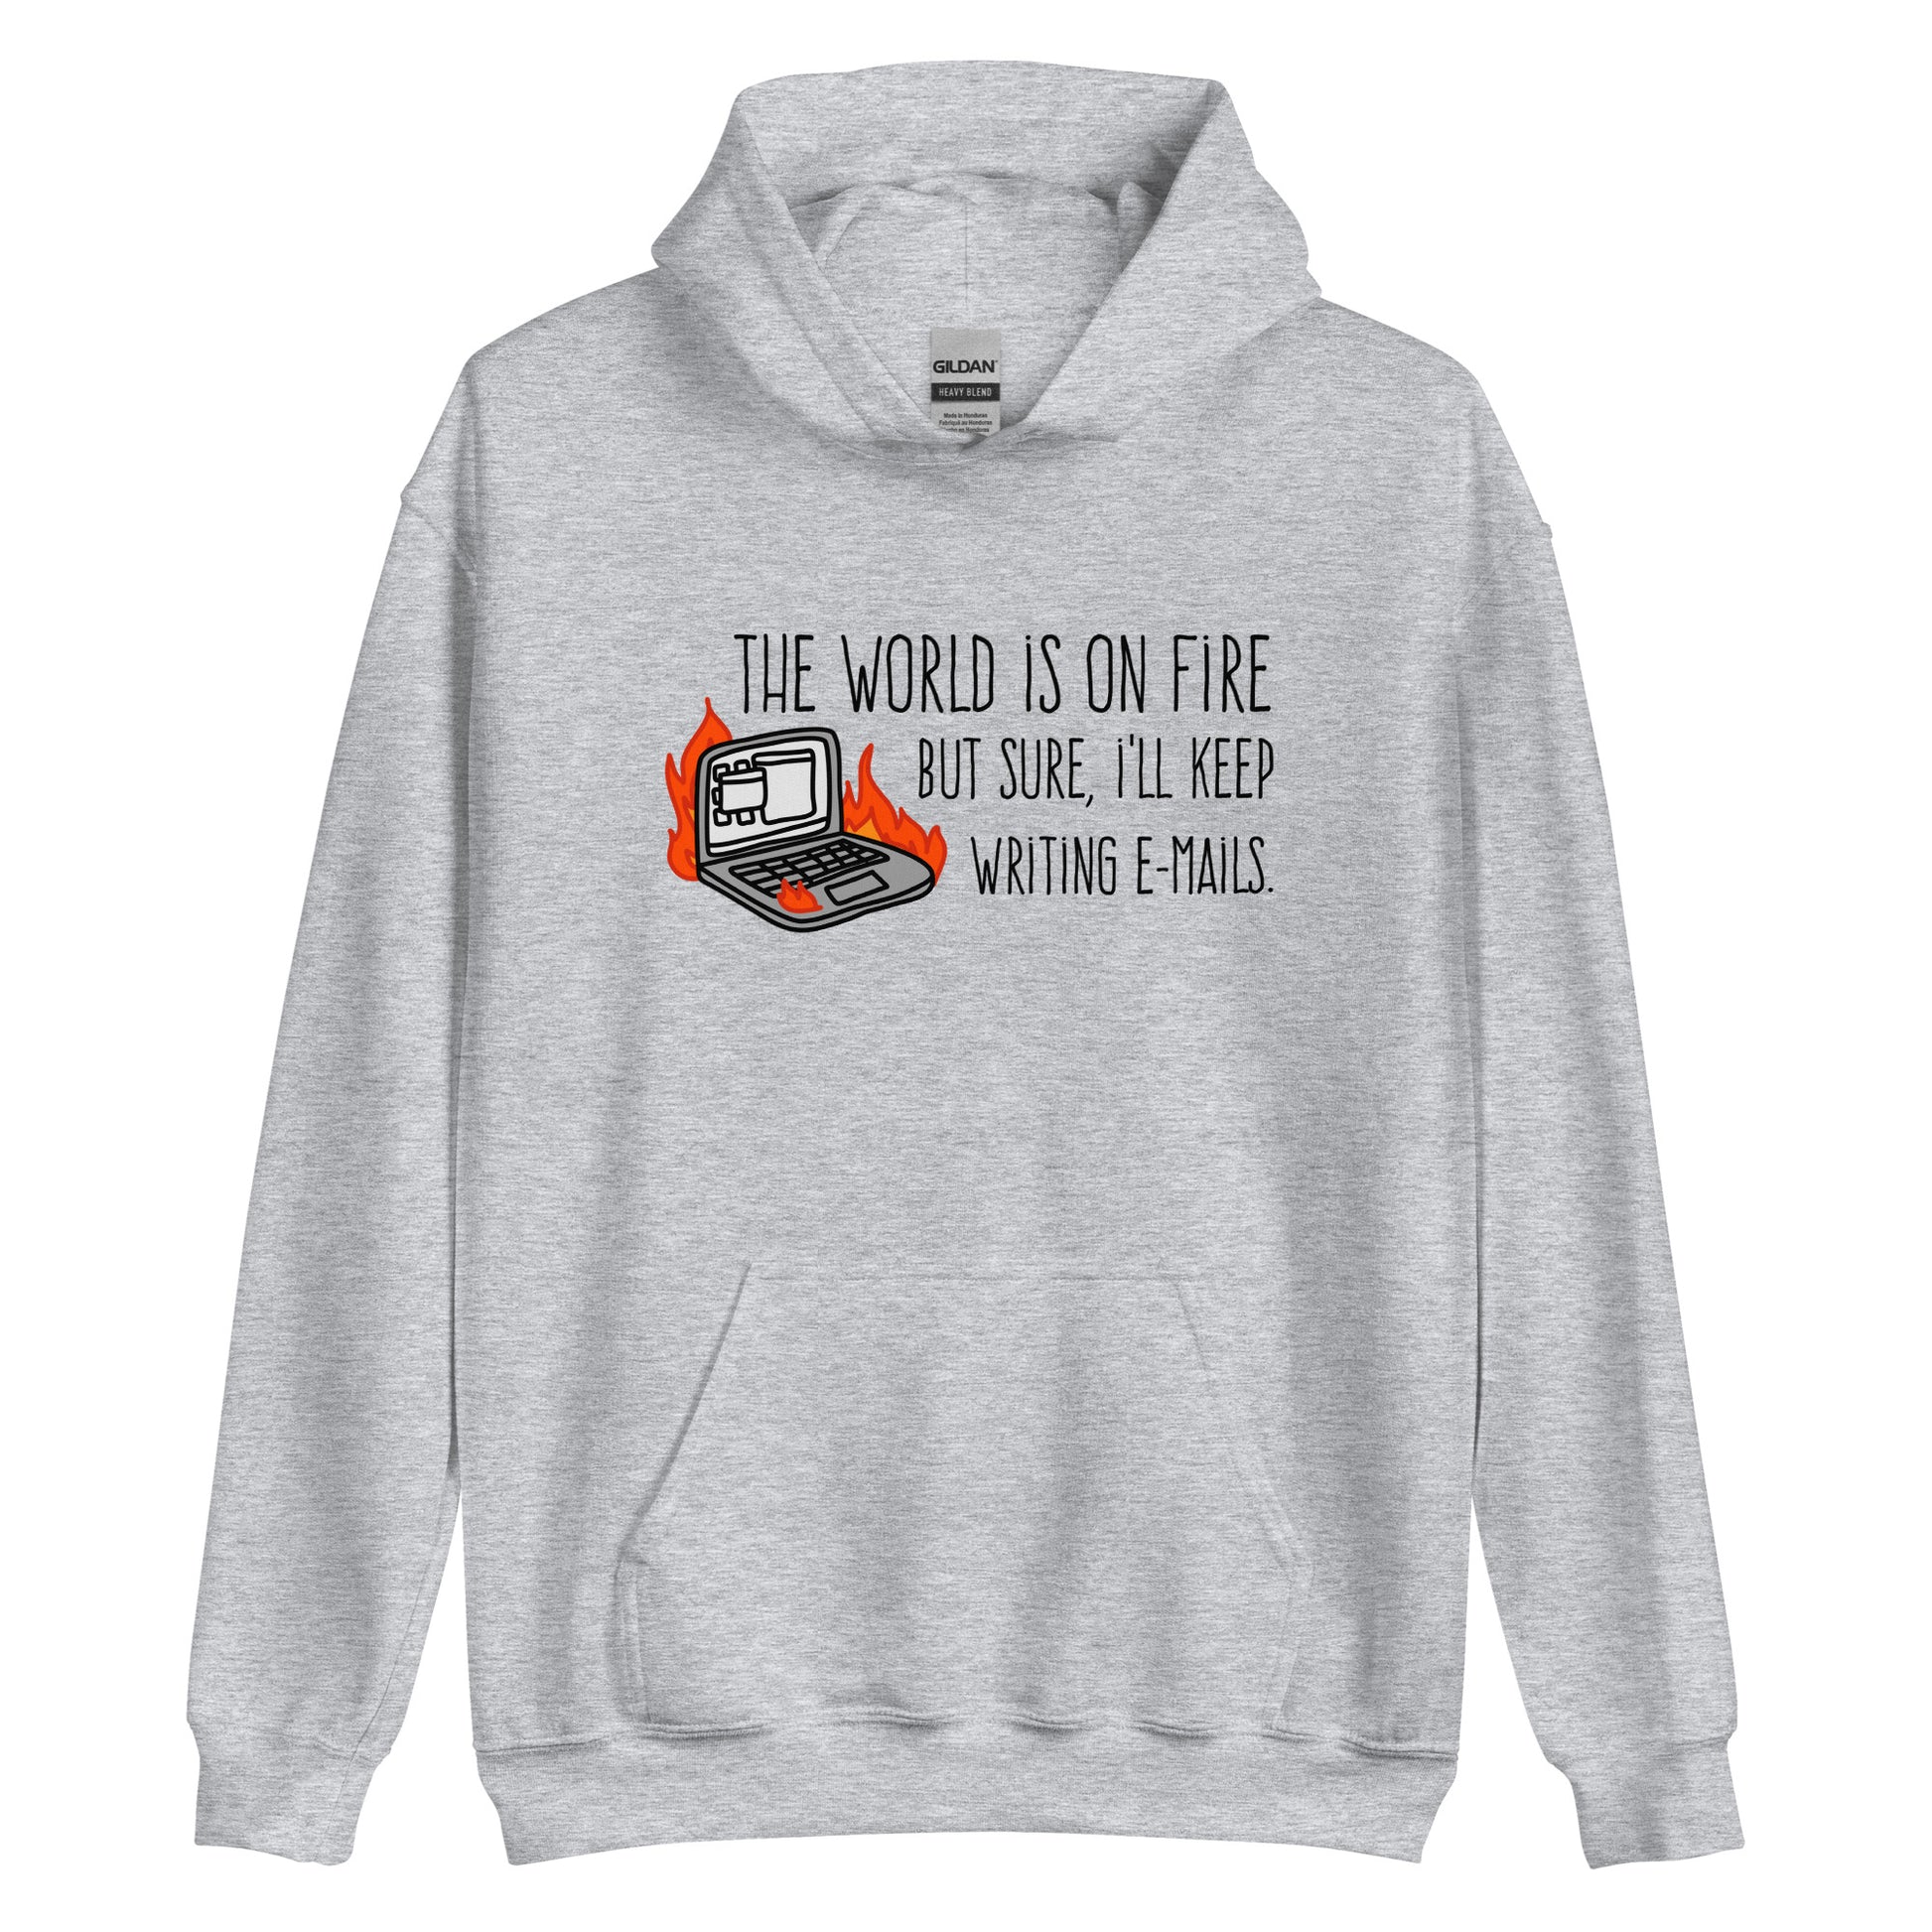 A light grey hooded sweatshirt featuring a squiggly illustration of a laptop that is on fire. Text alongside the laptop reads "the world is on fire but sure, I'll keep writing e-mails."